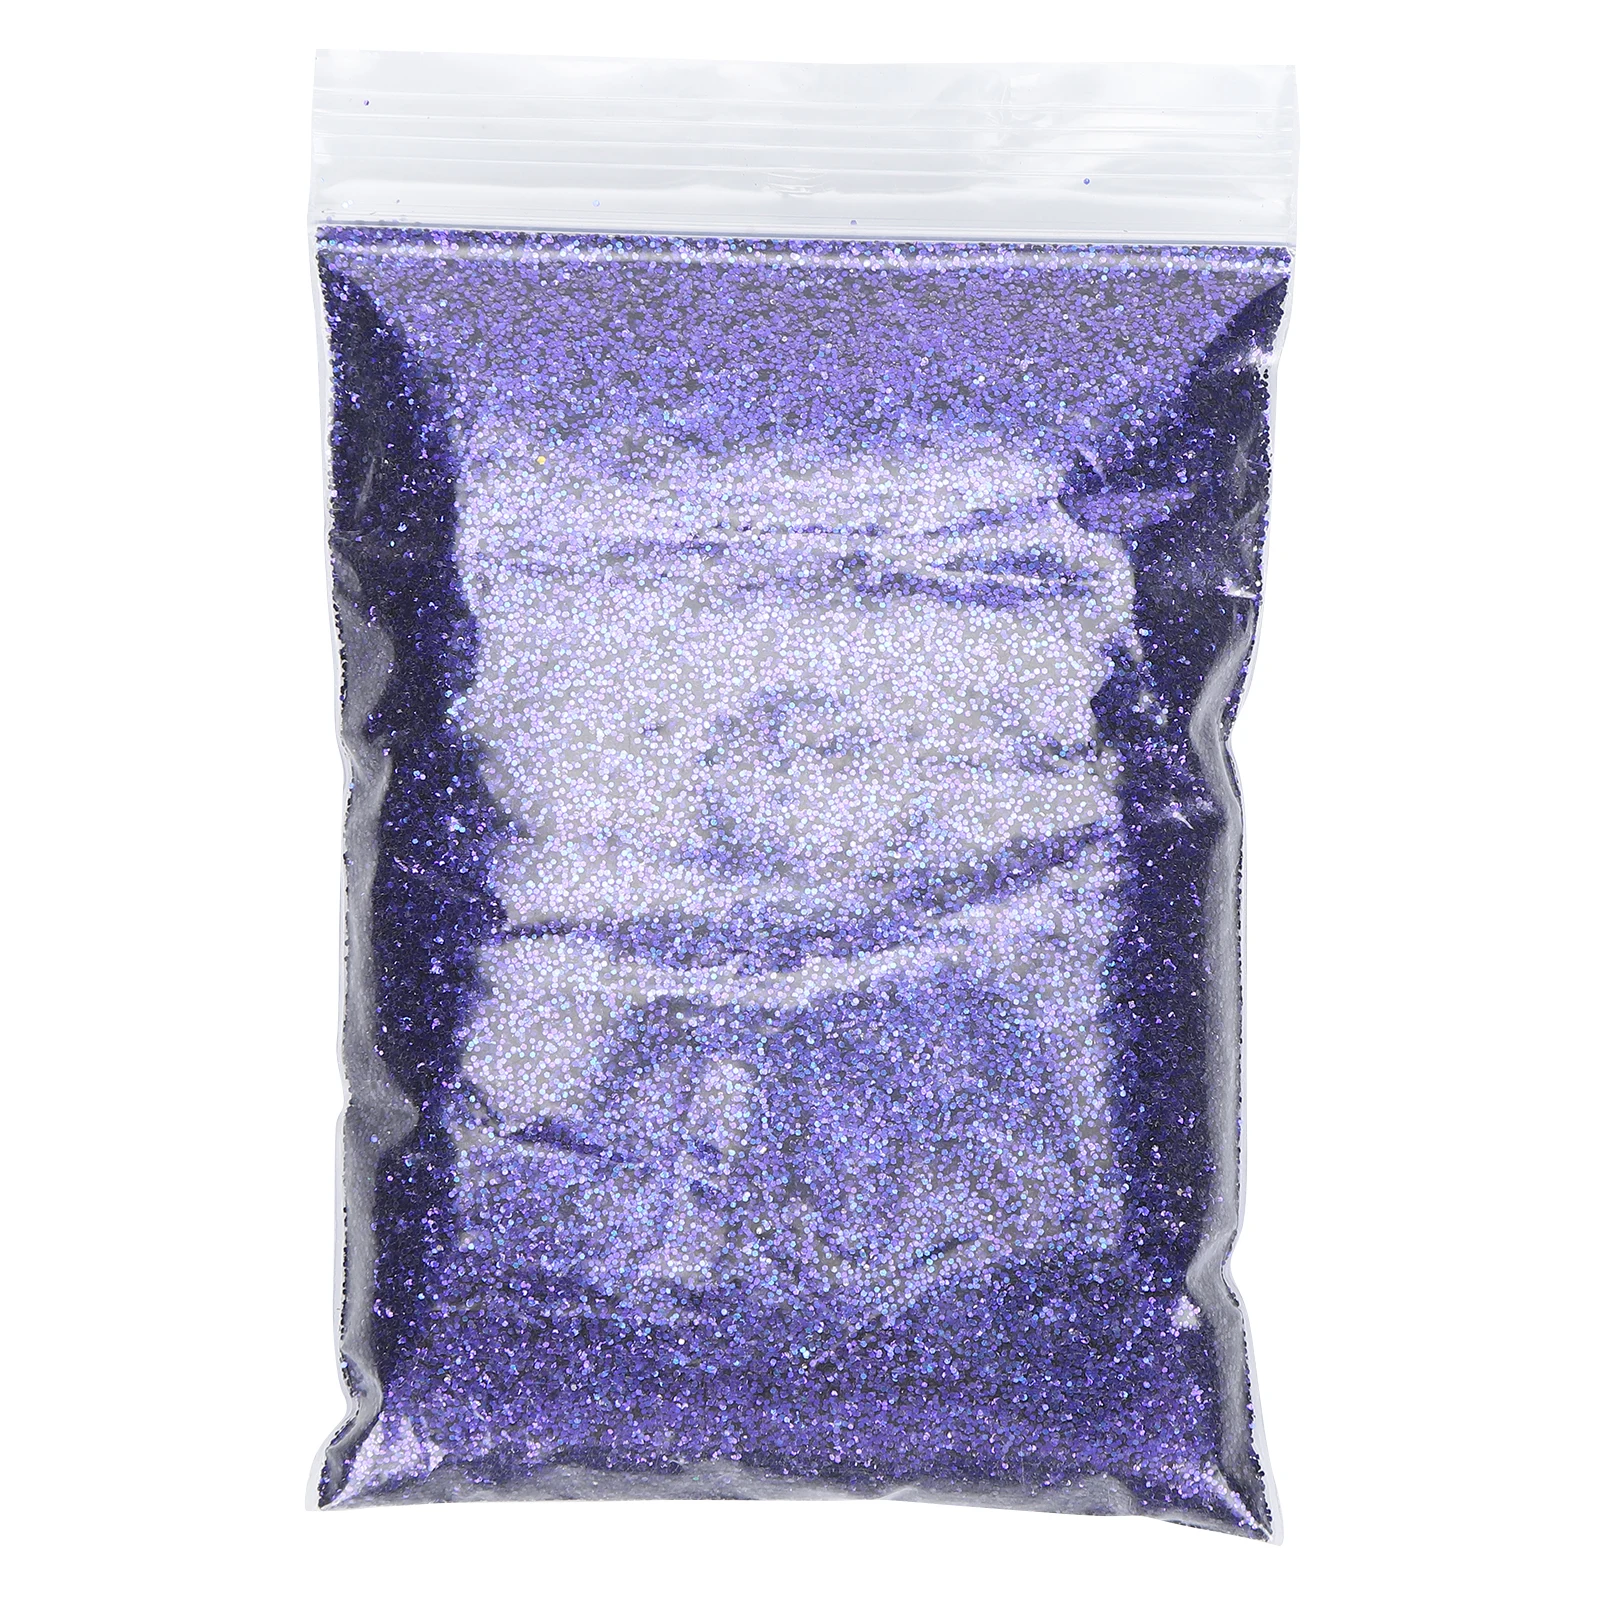 

50g Glitter Holographic Sequins DIY Craft Project Nail Art Decoration Accessory Supplies 7777